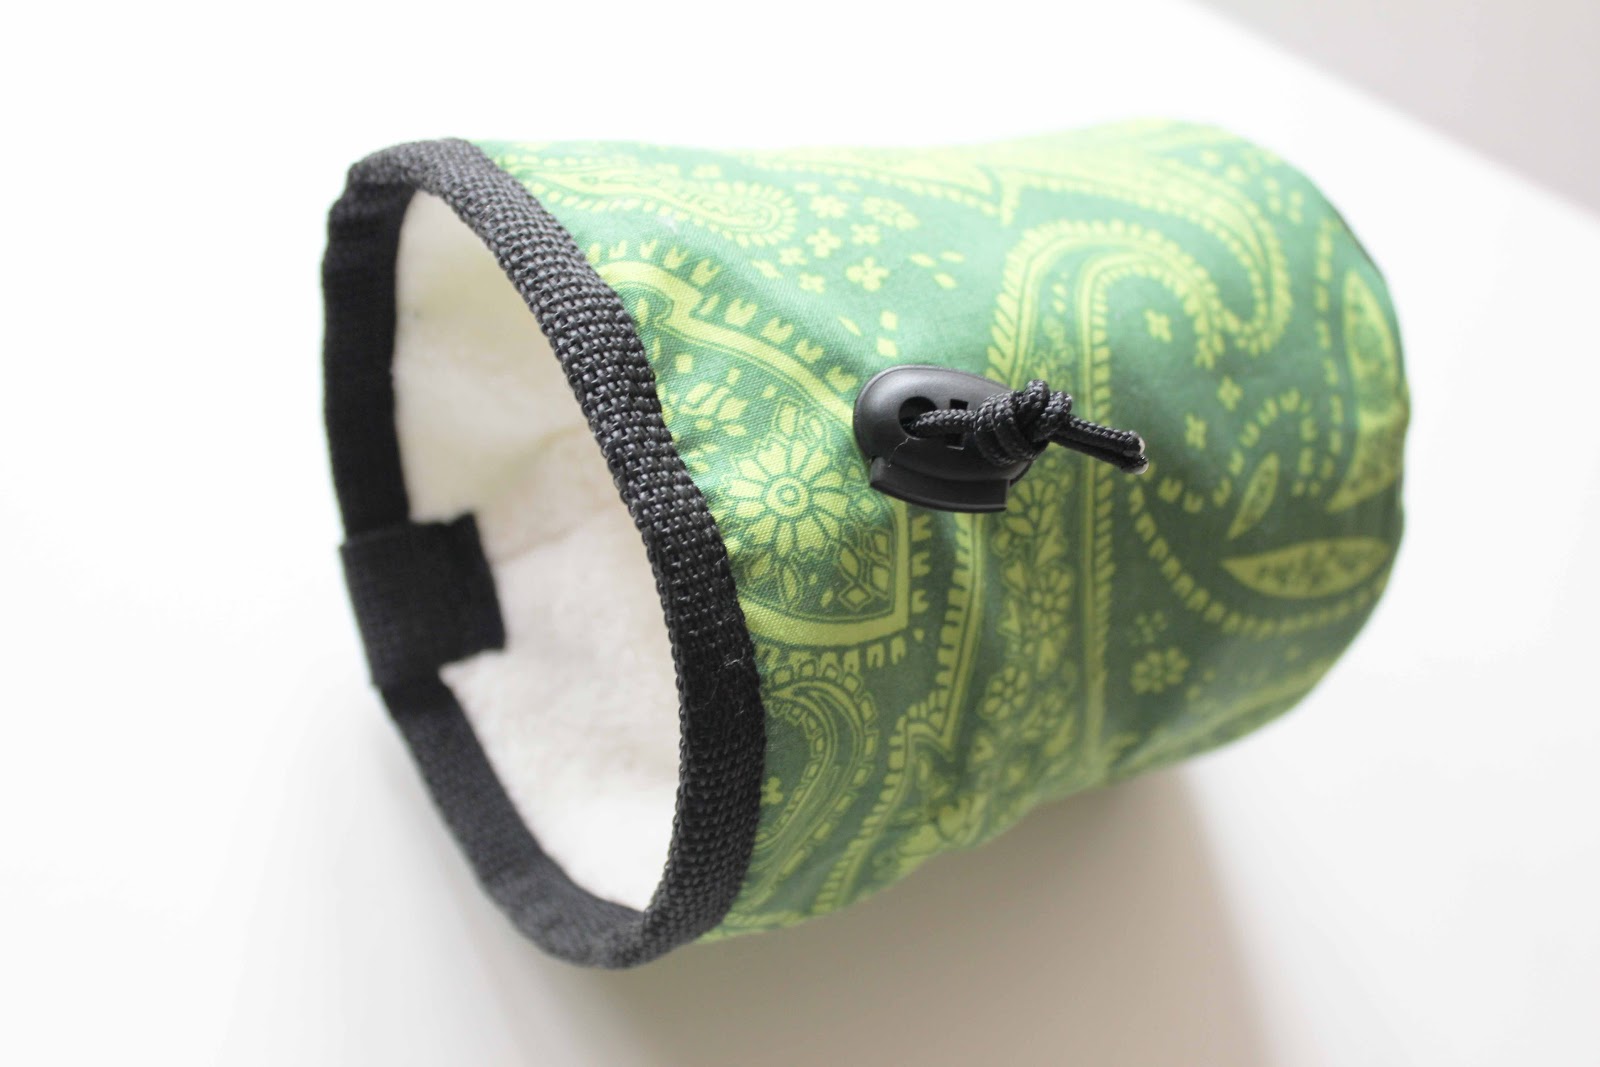 Learn This: Make Your Own Chalk Bag